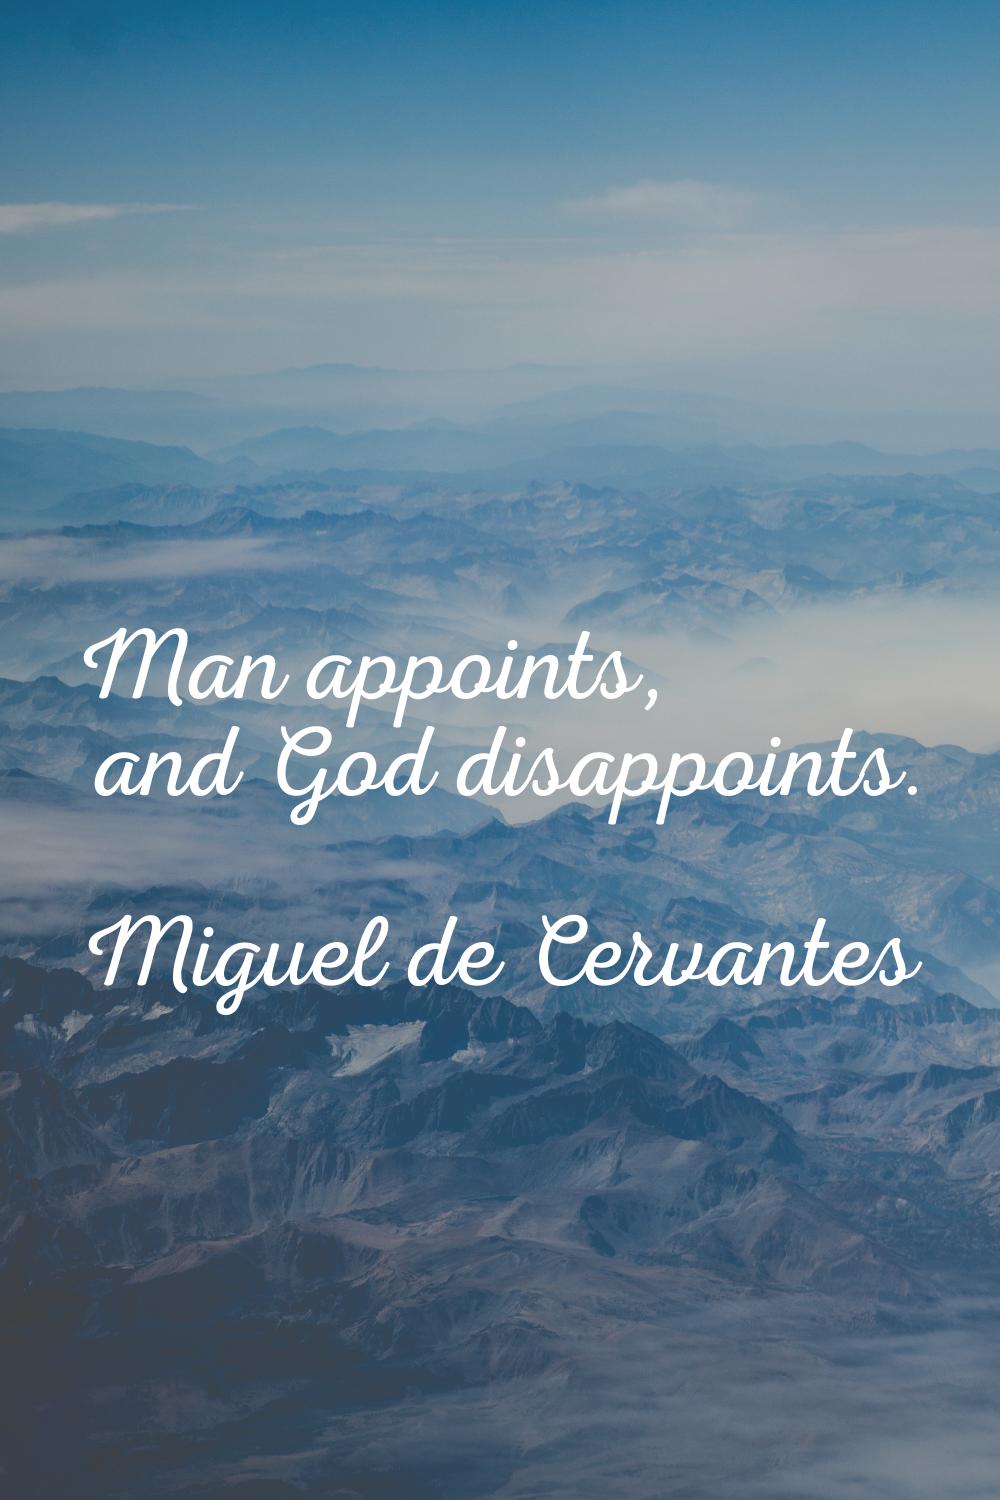 Man appoints, and God disappoints.